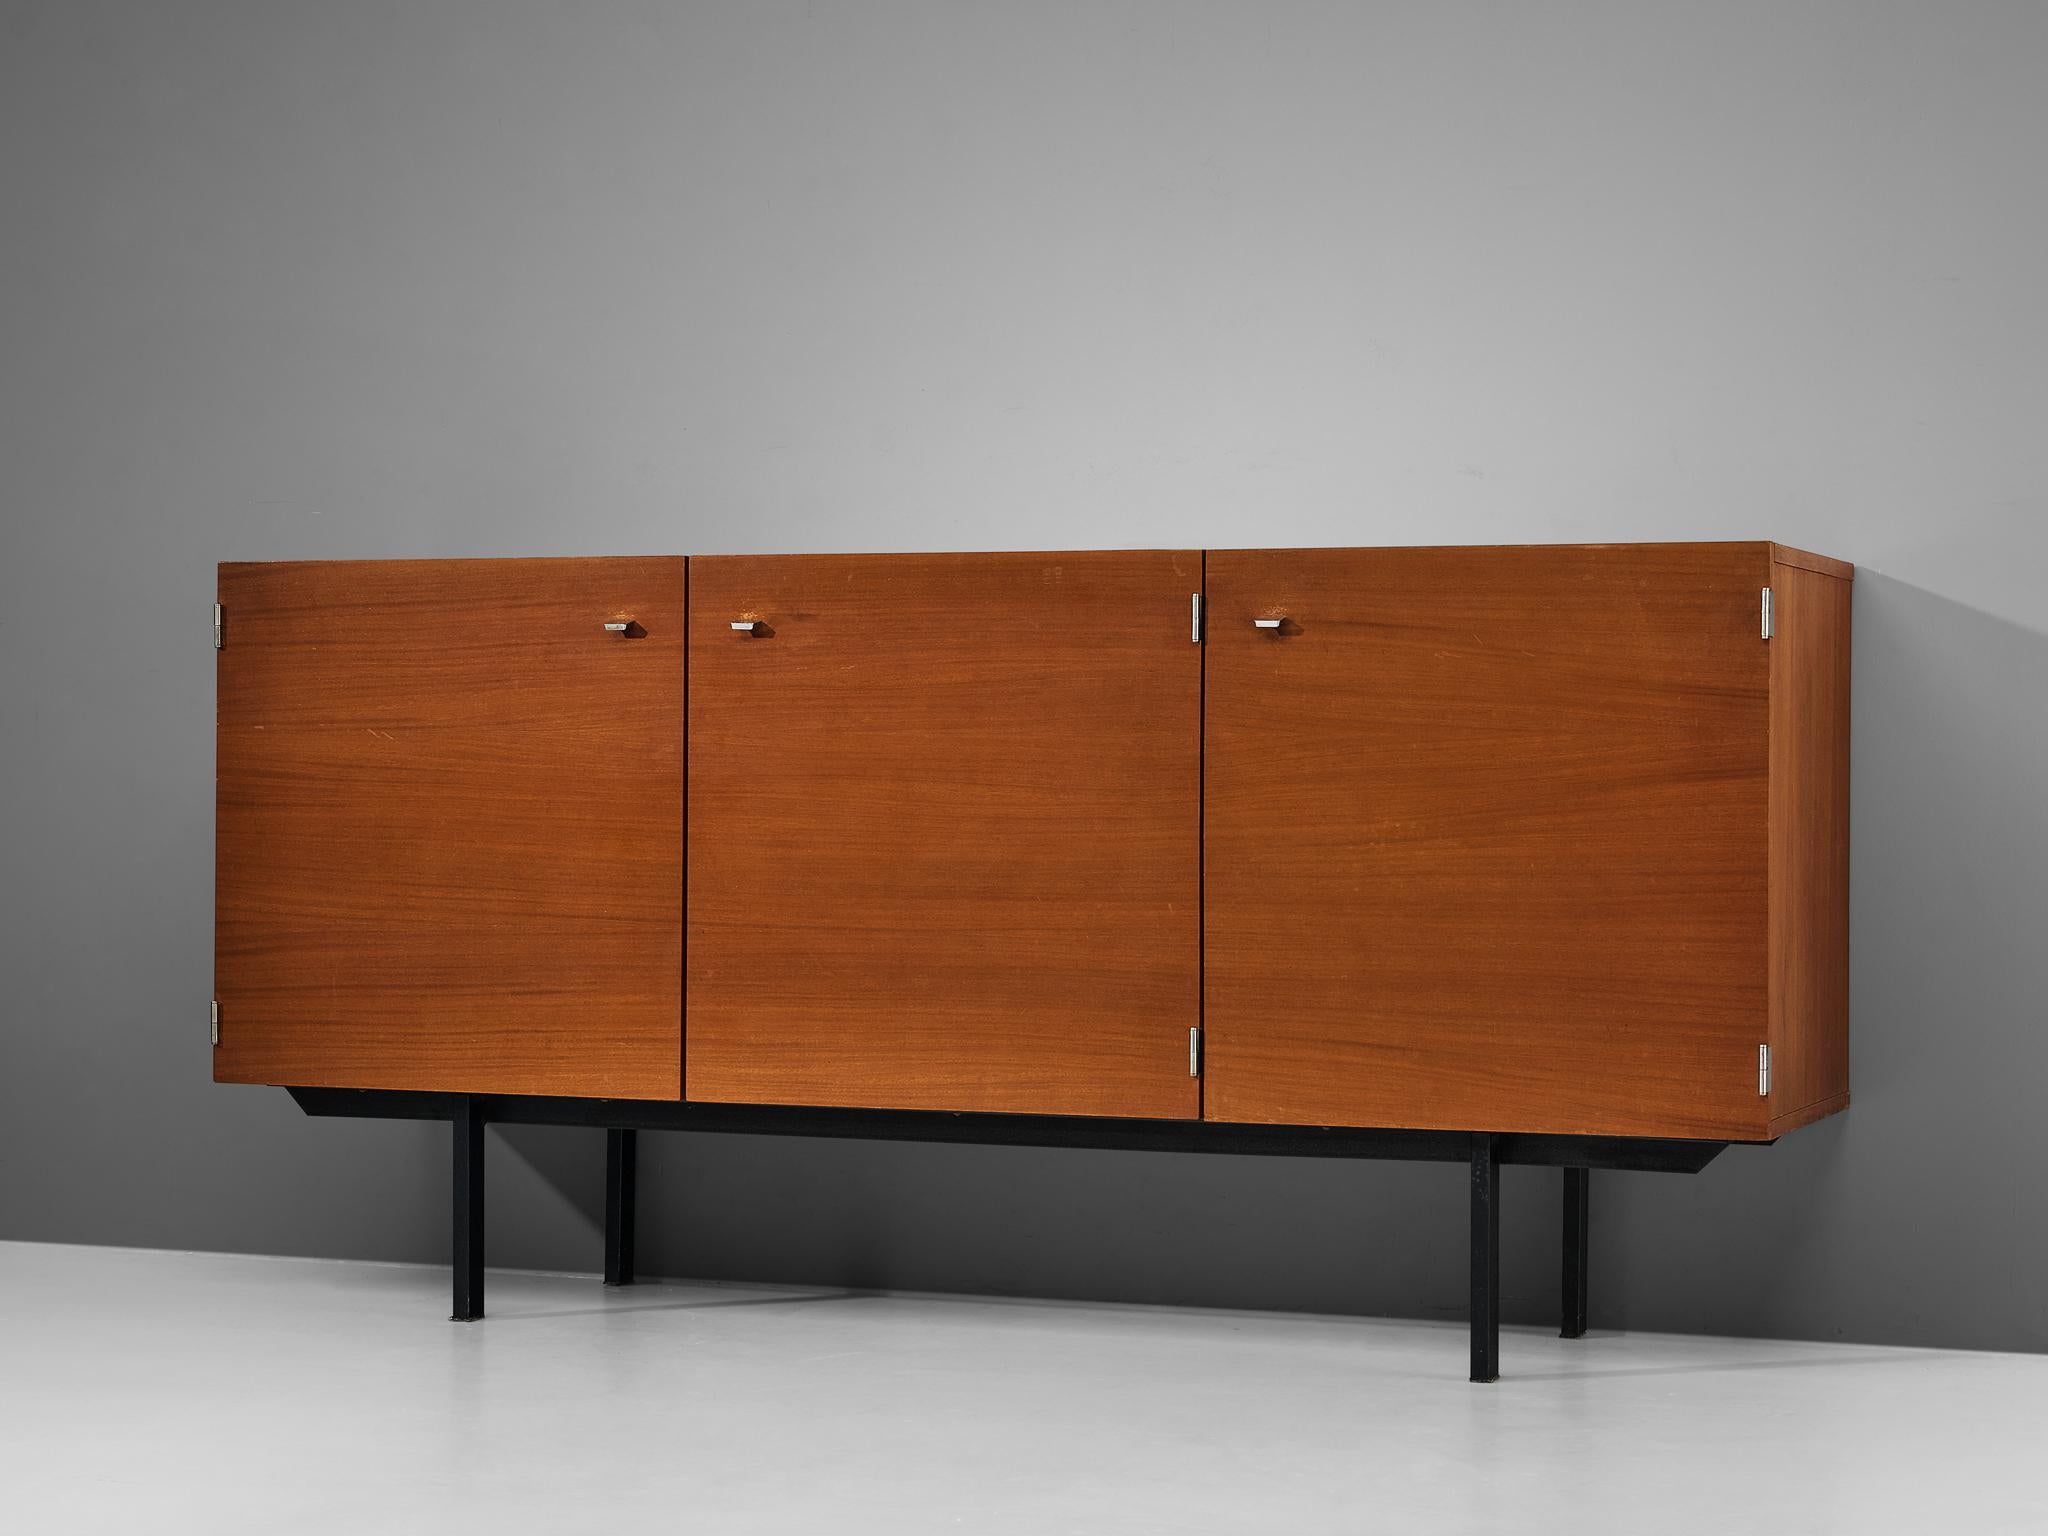 Pierre Guariche for Meurop, sideboard, mahogany, metal, Belgium, 1970s

French designer Pierre Guariche created this sideboard for the Belgian manufacturer, Meurop. The sideboard, a testament to Guariche's keen design sensibilities, features three